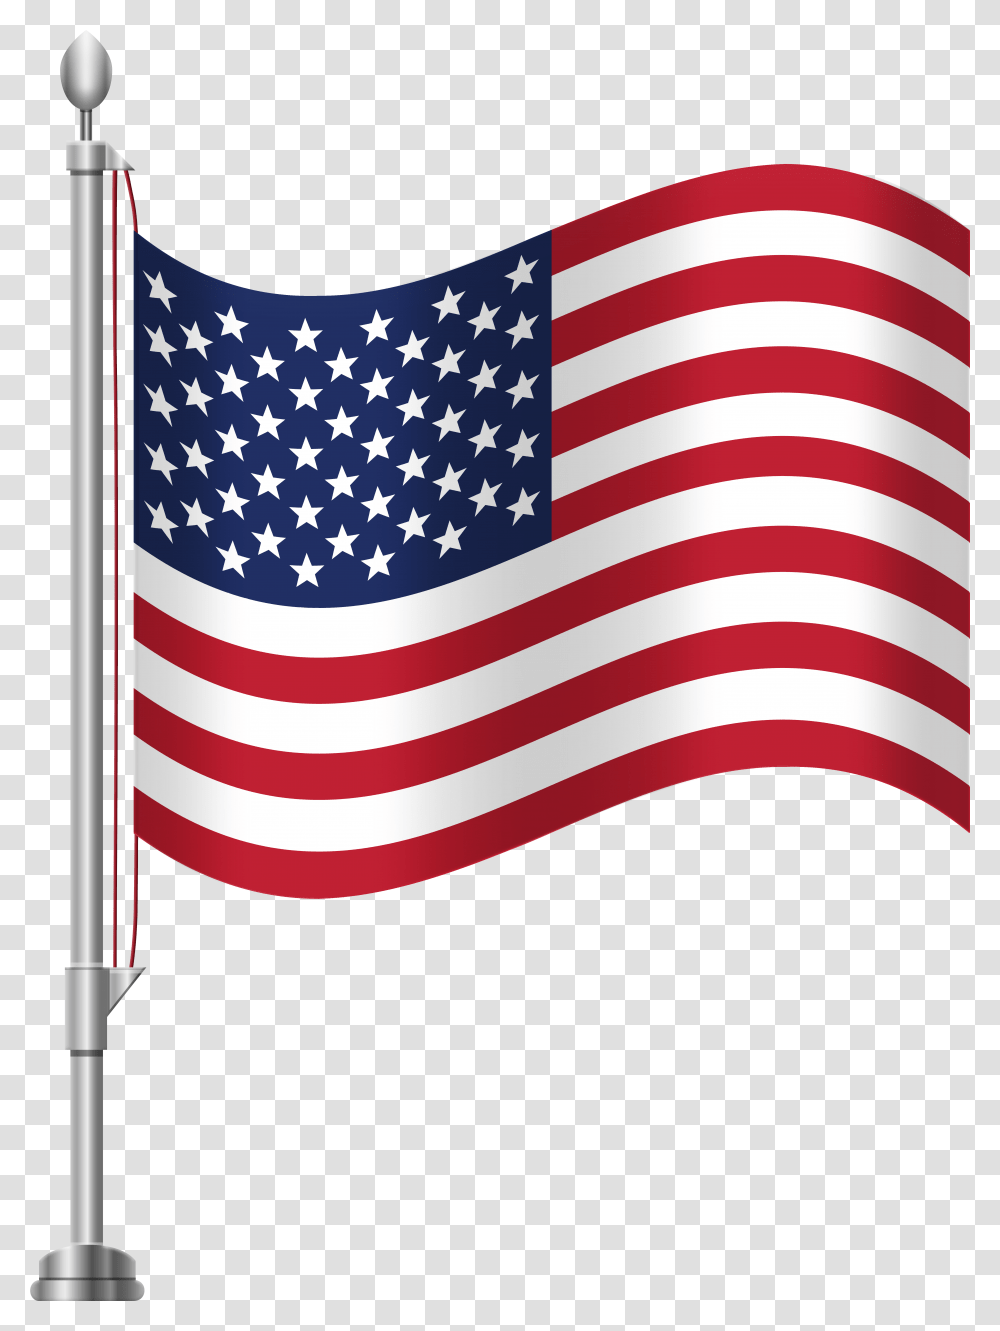 United States Of America Flag Clip Art, American Flag Transparent Png